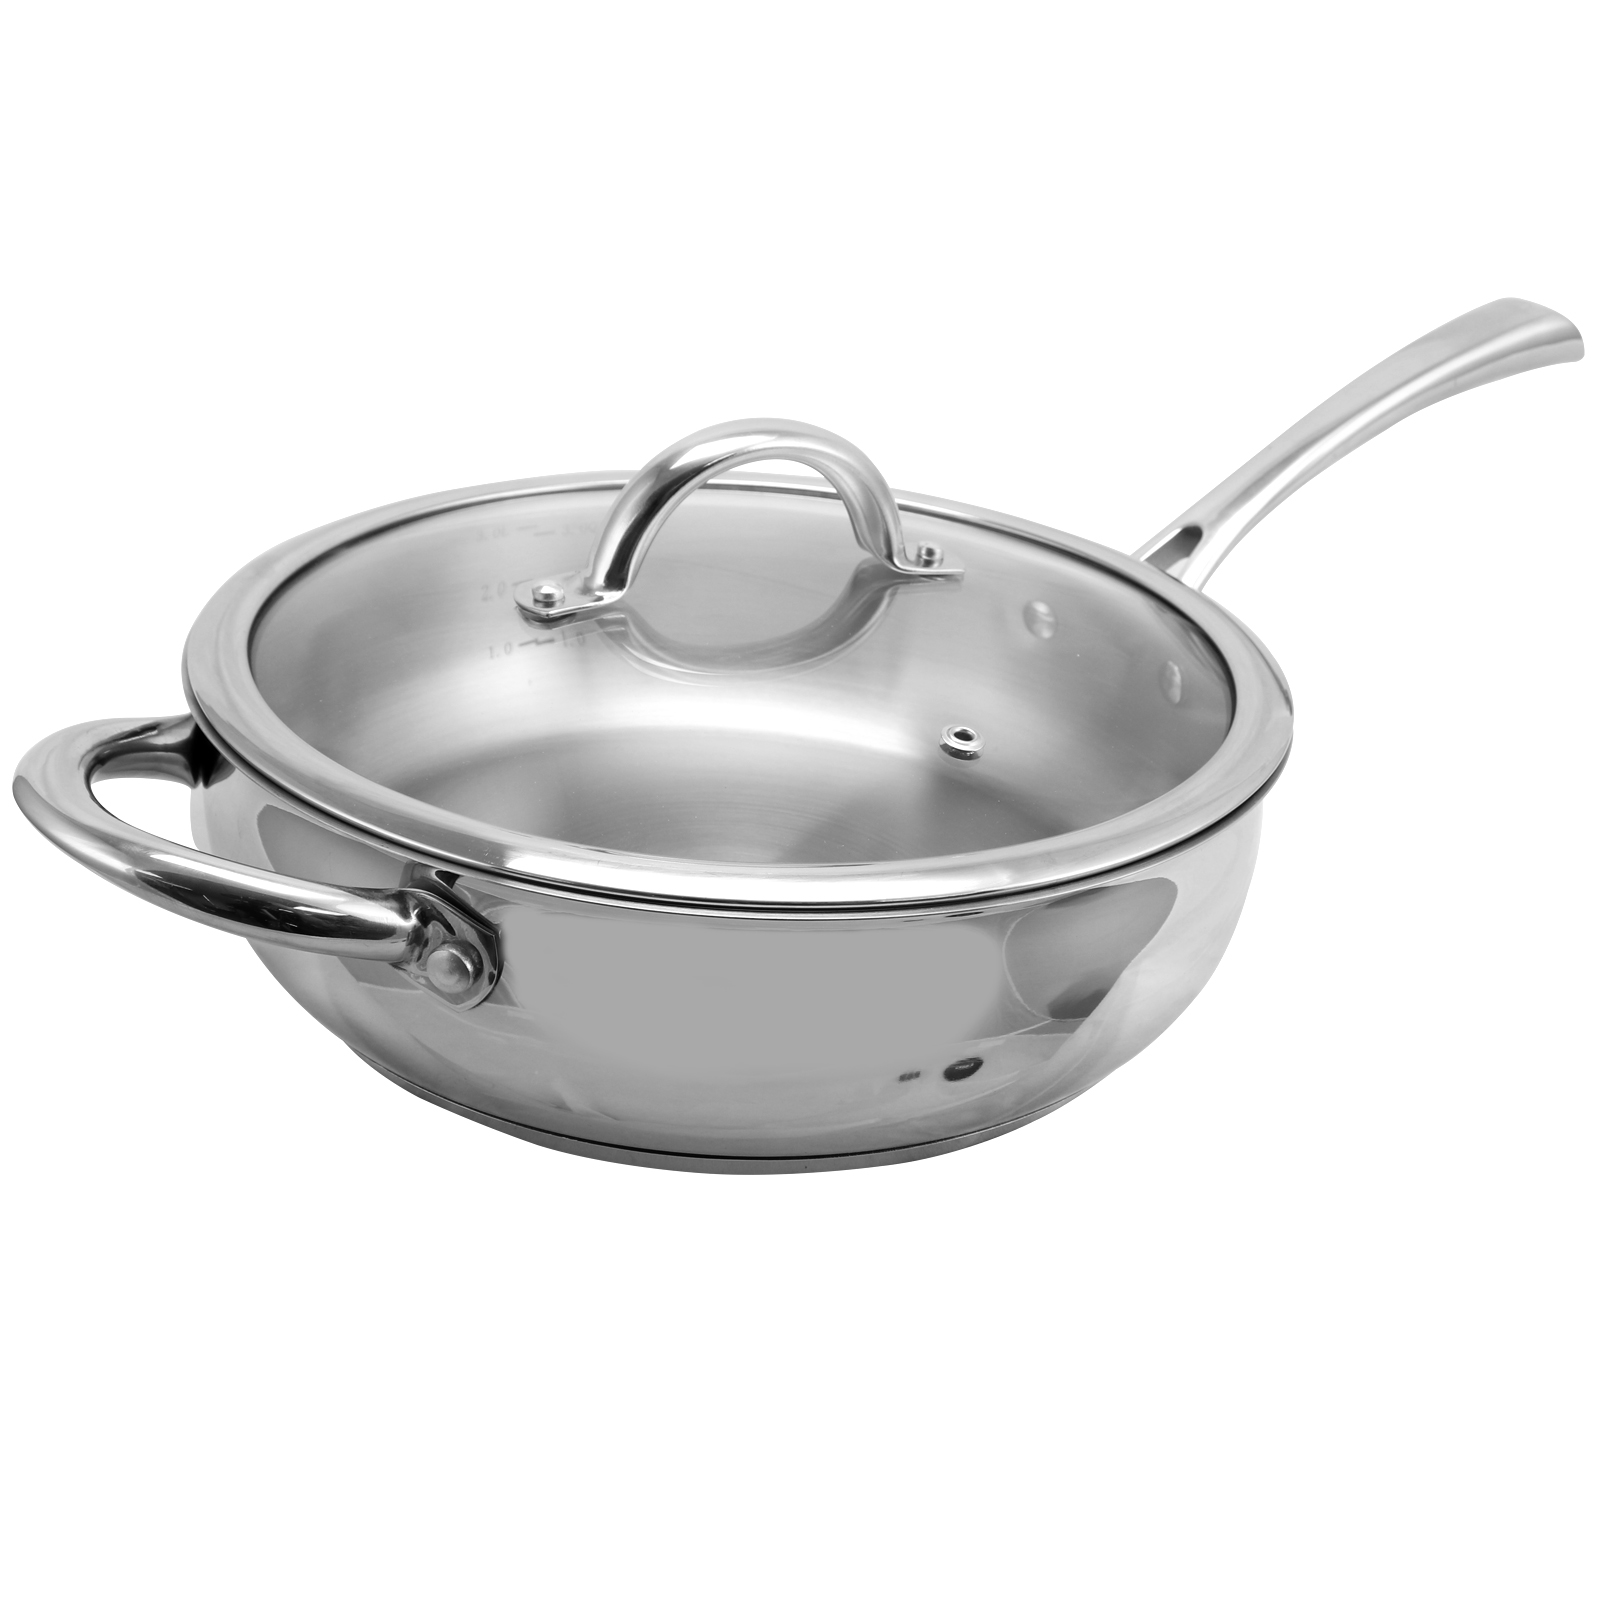 Oster Cuisine Derrick 10 inch Stainless Steel Saute&#169; Pan with Lid